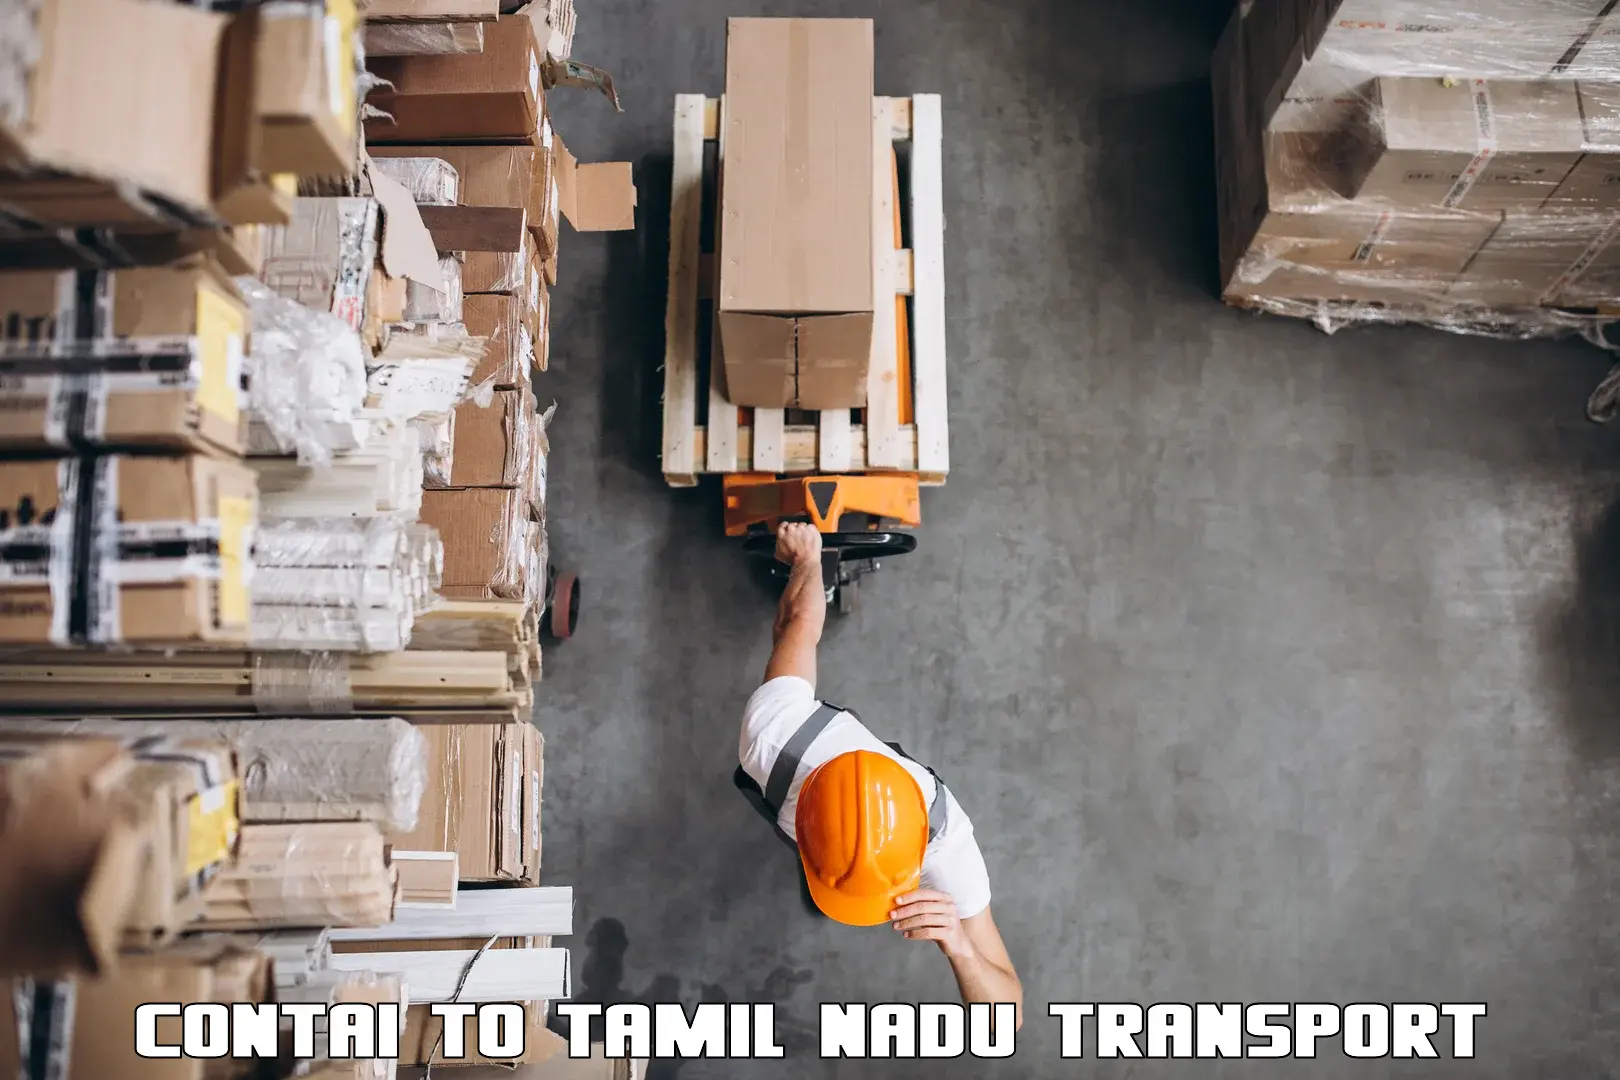 Transport bike from one state to another Contai to Tamil Nadu